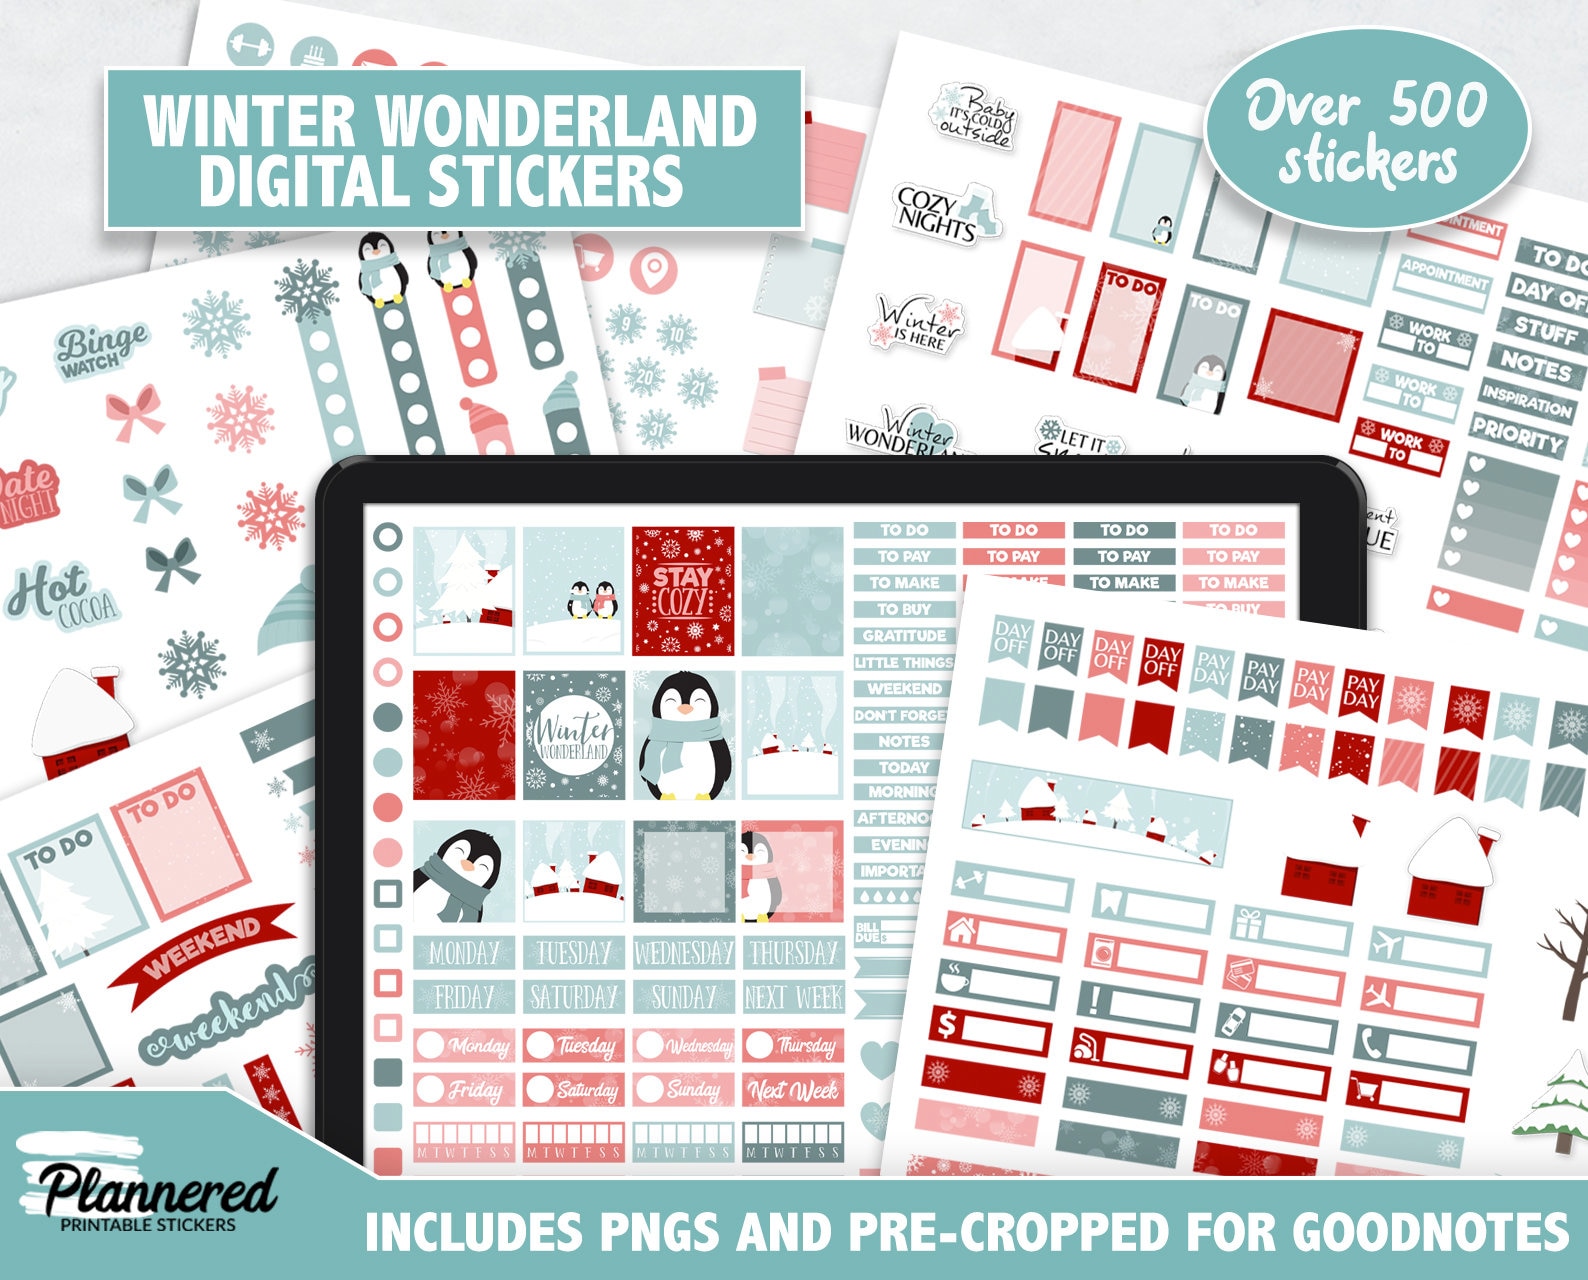 Winter Clipart, Winter Scrapbook, Holiday Clipart, Winter Sticker Clipart,  Winter Clip Art, Winter Planner Stickers, Printable Winter 